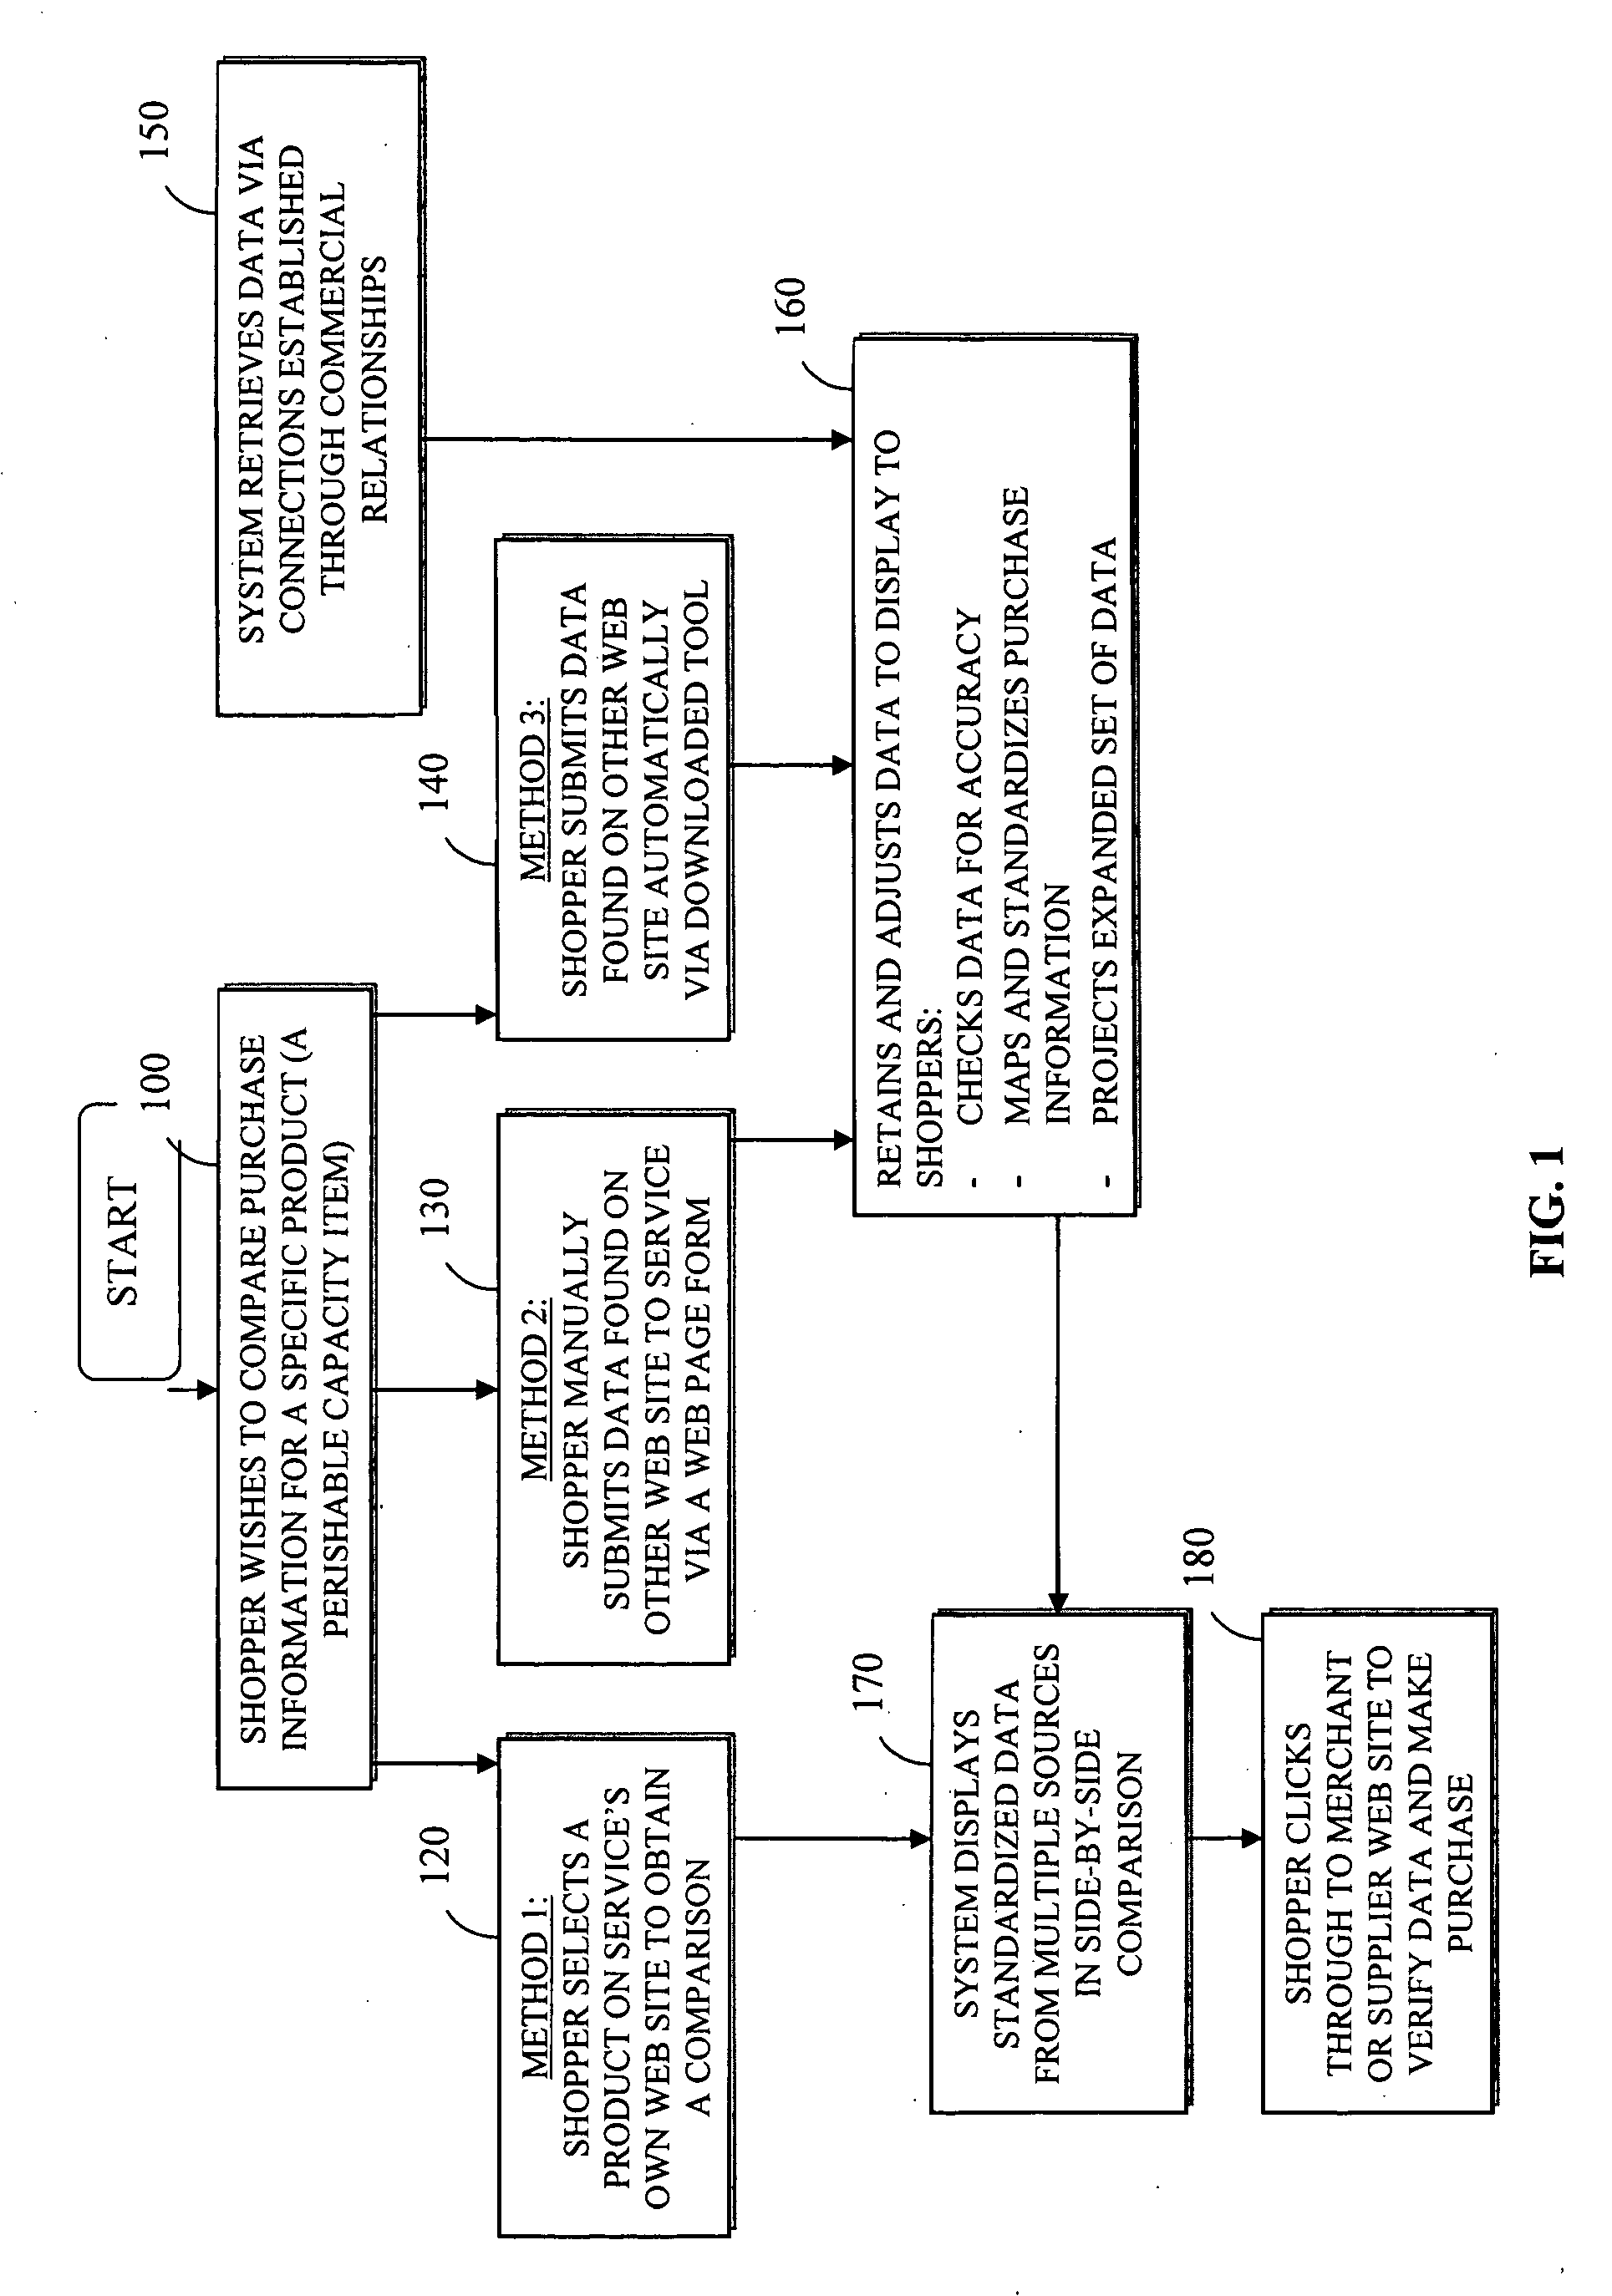 Method and system for aggregating, standardizing and presenting purchase information from shoppers and sellers to facilitate comparison shopping and purchases